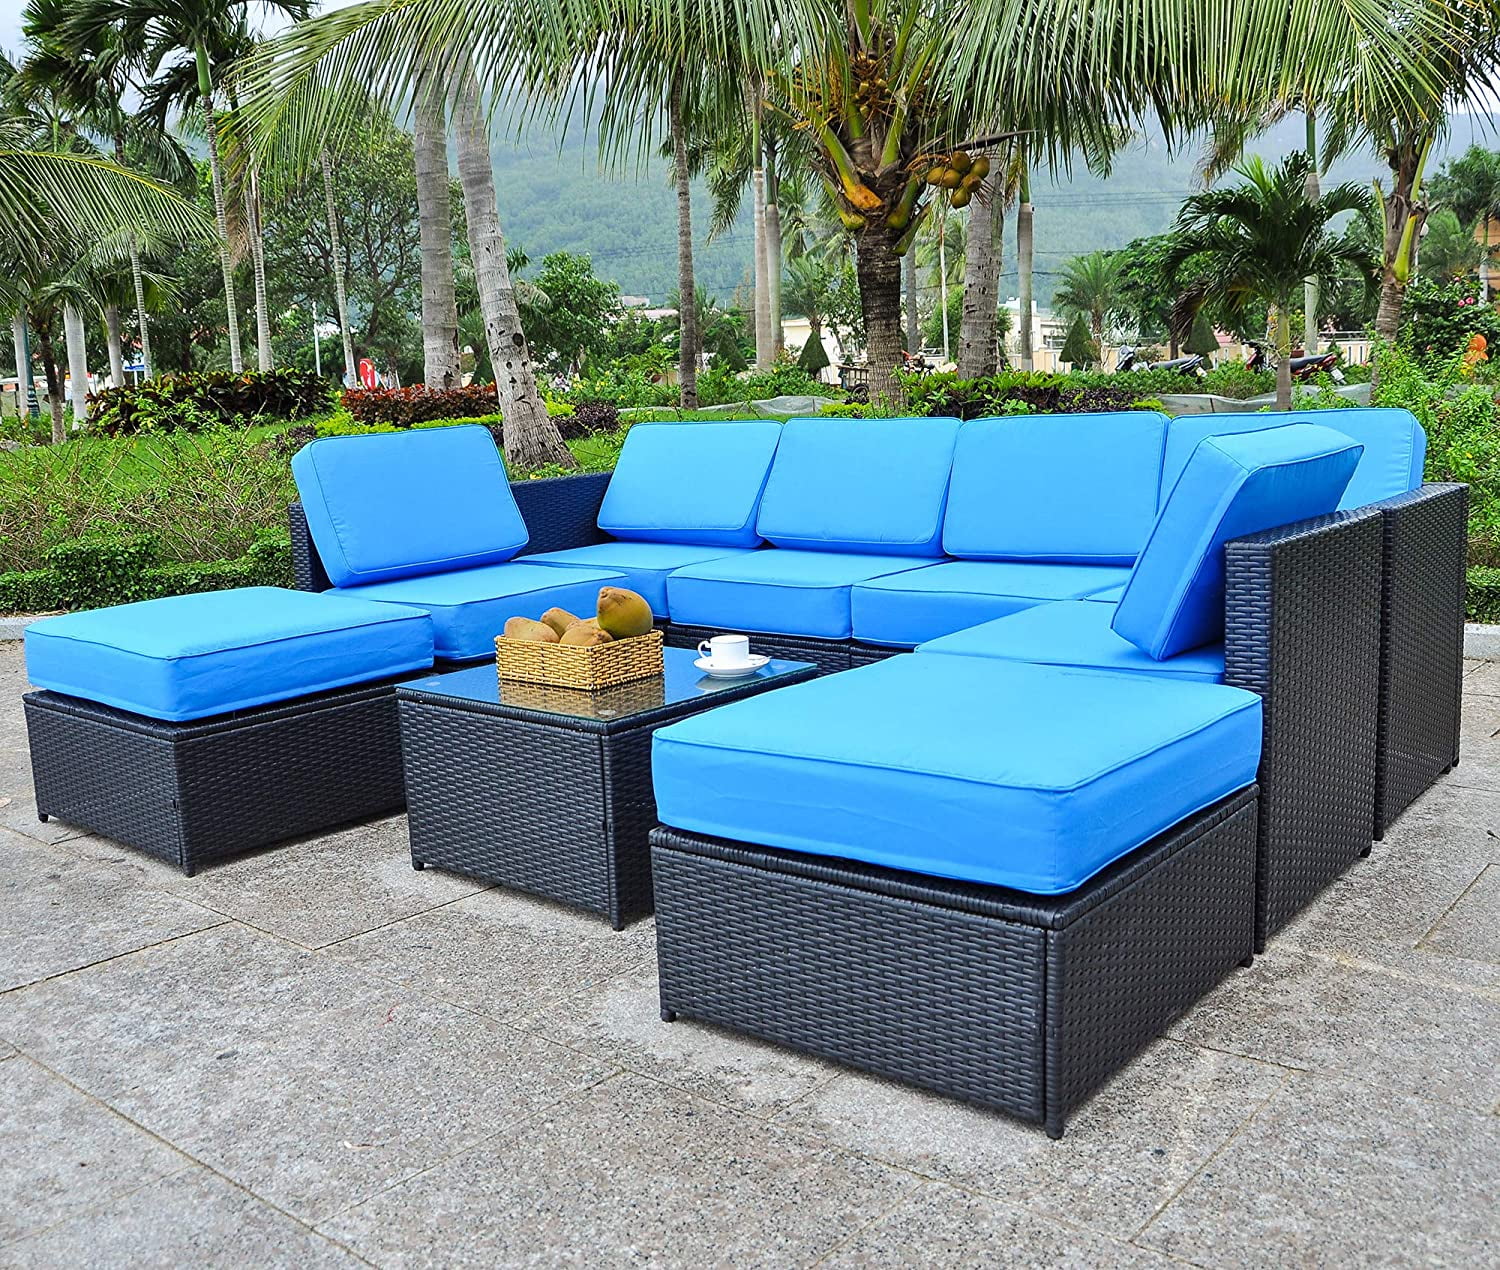 Mcombo Patio Furniture Sectional 9 Pieces Wicker Sofa Set All Weather Outdoor Seating Black